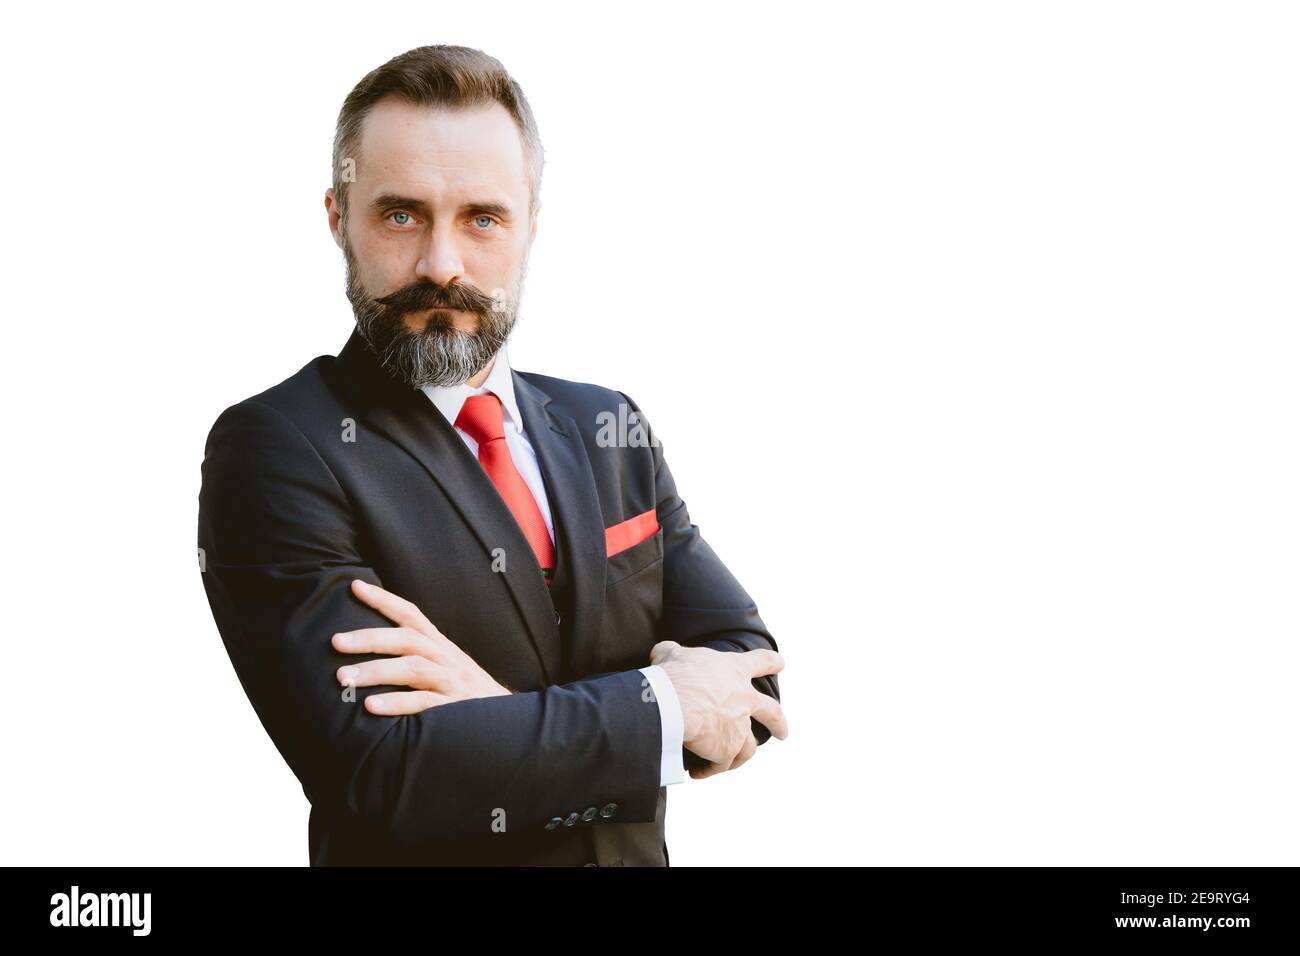 Serious Businessman Latin beard standing confidence isolated on white background with clipping path Stock Photo